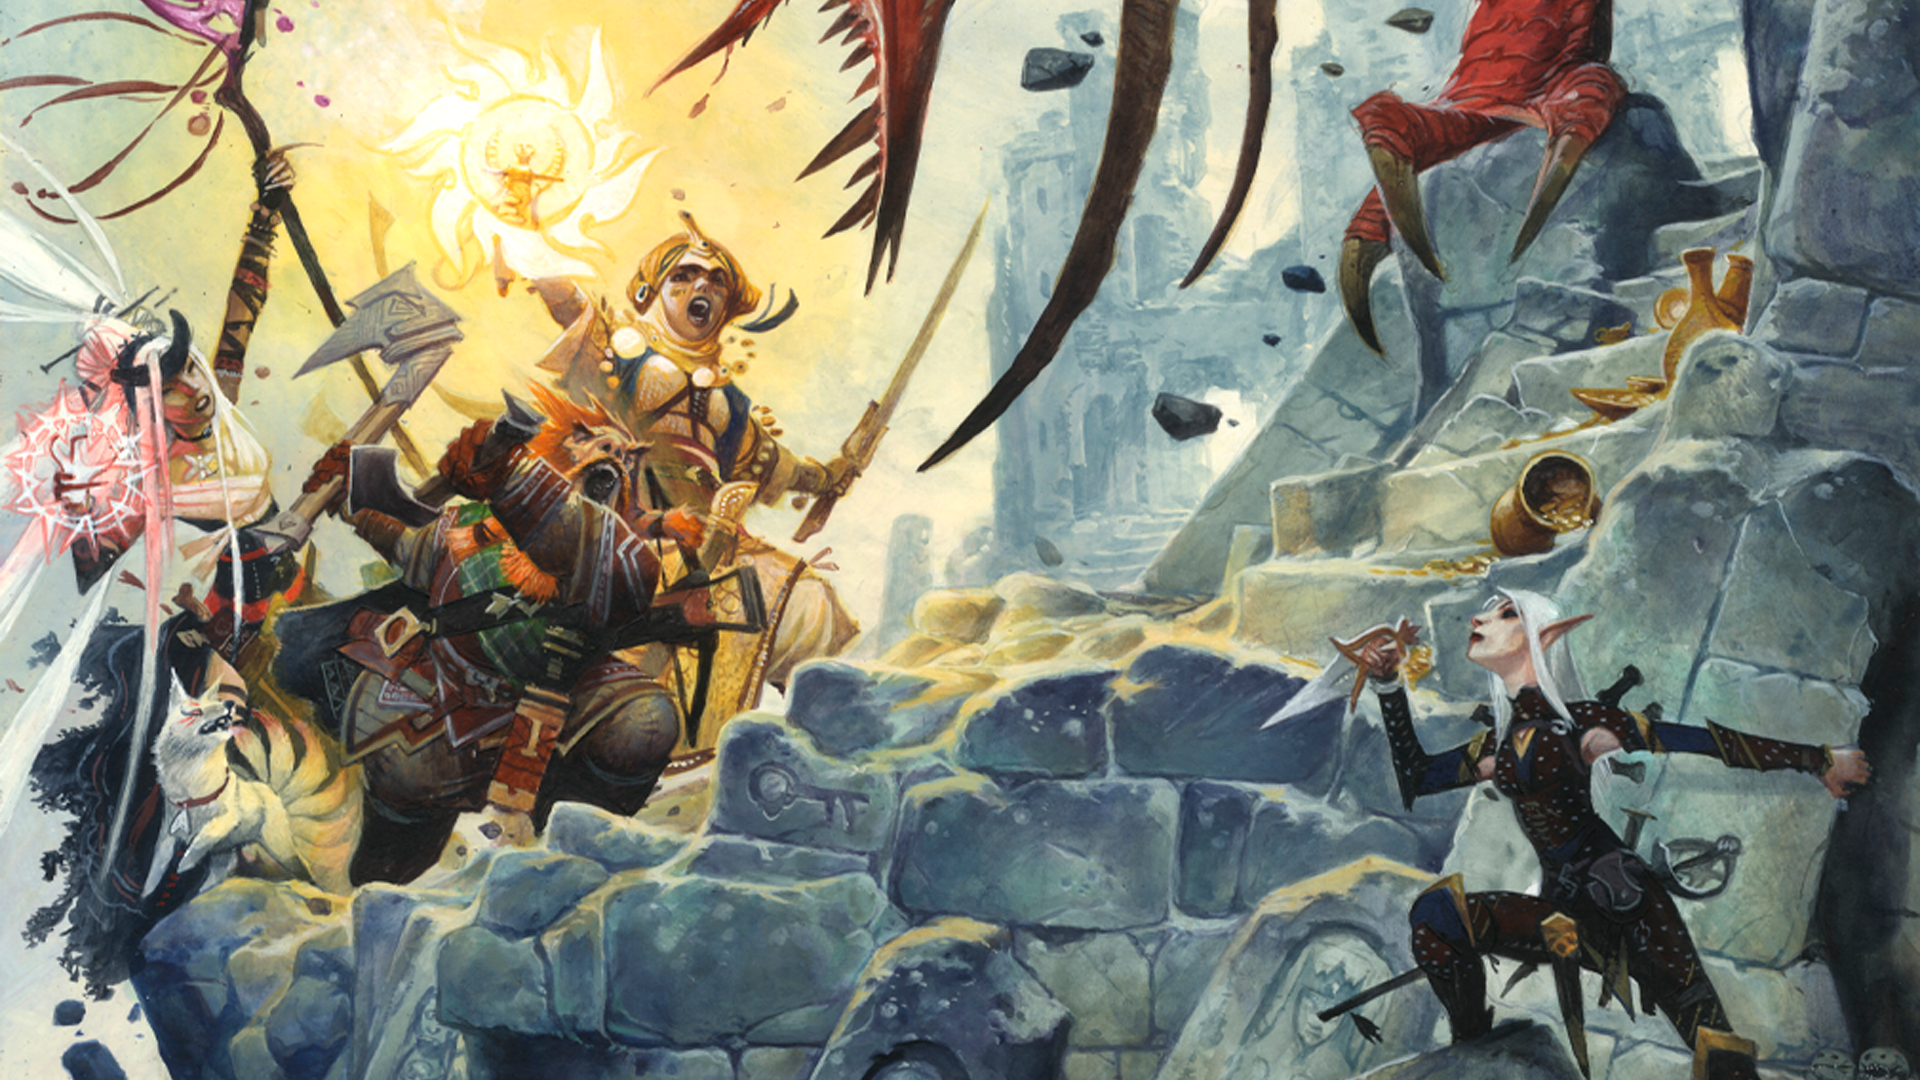 Player Core Cover featuring iconics Harsk, Kyra, and Merisiel facing against a red dragon amongst stone ruins